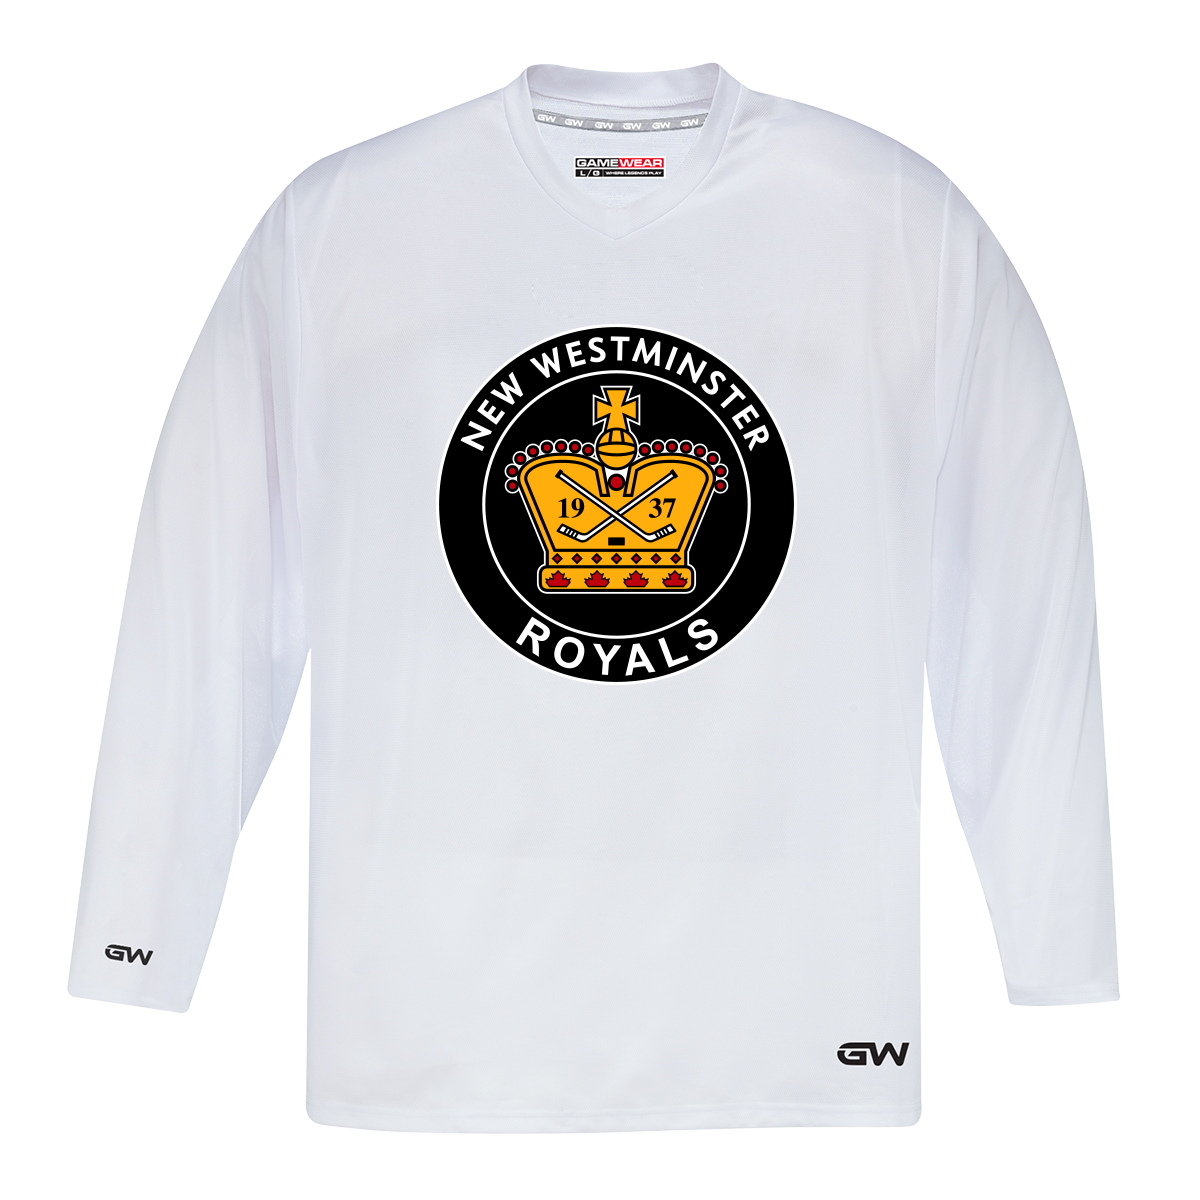 New West Royals -- Youth GameWear Practice Jersey